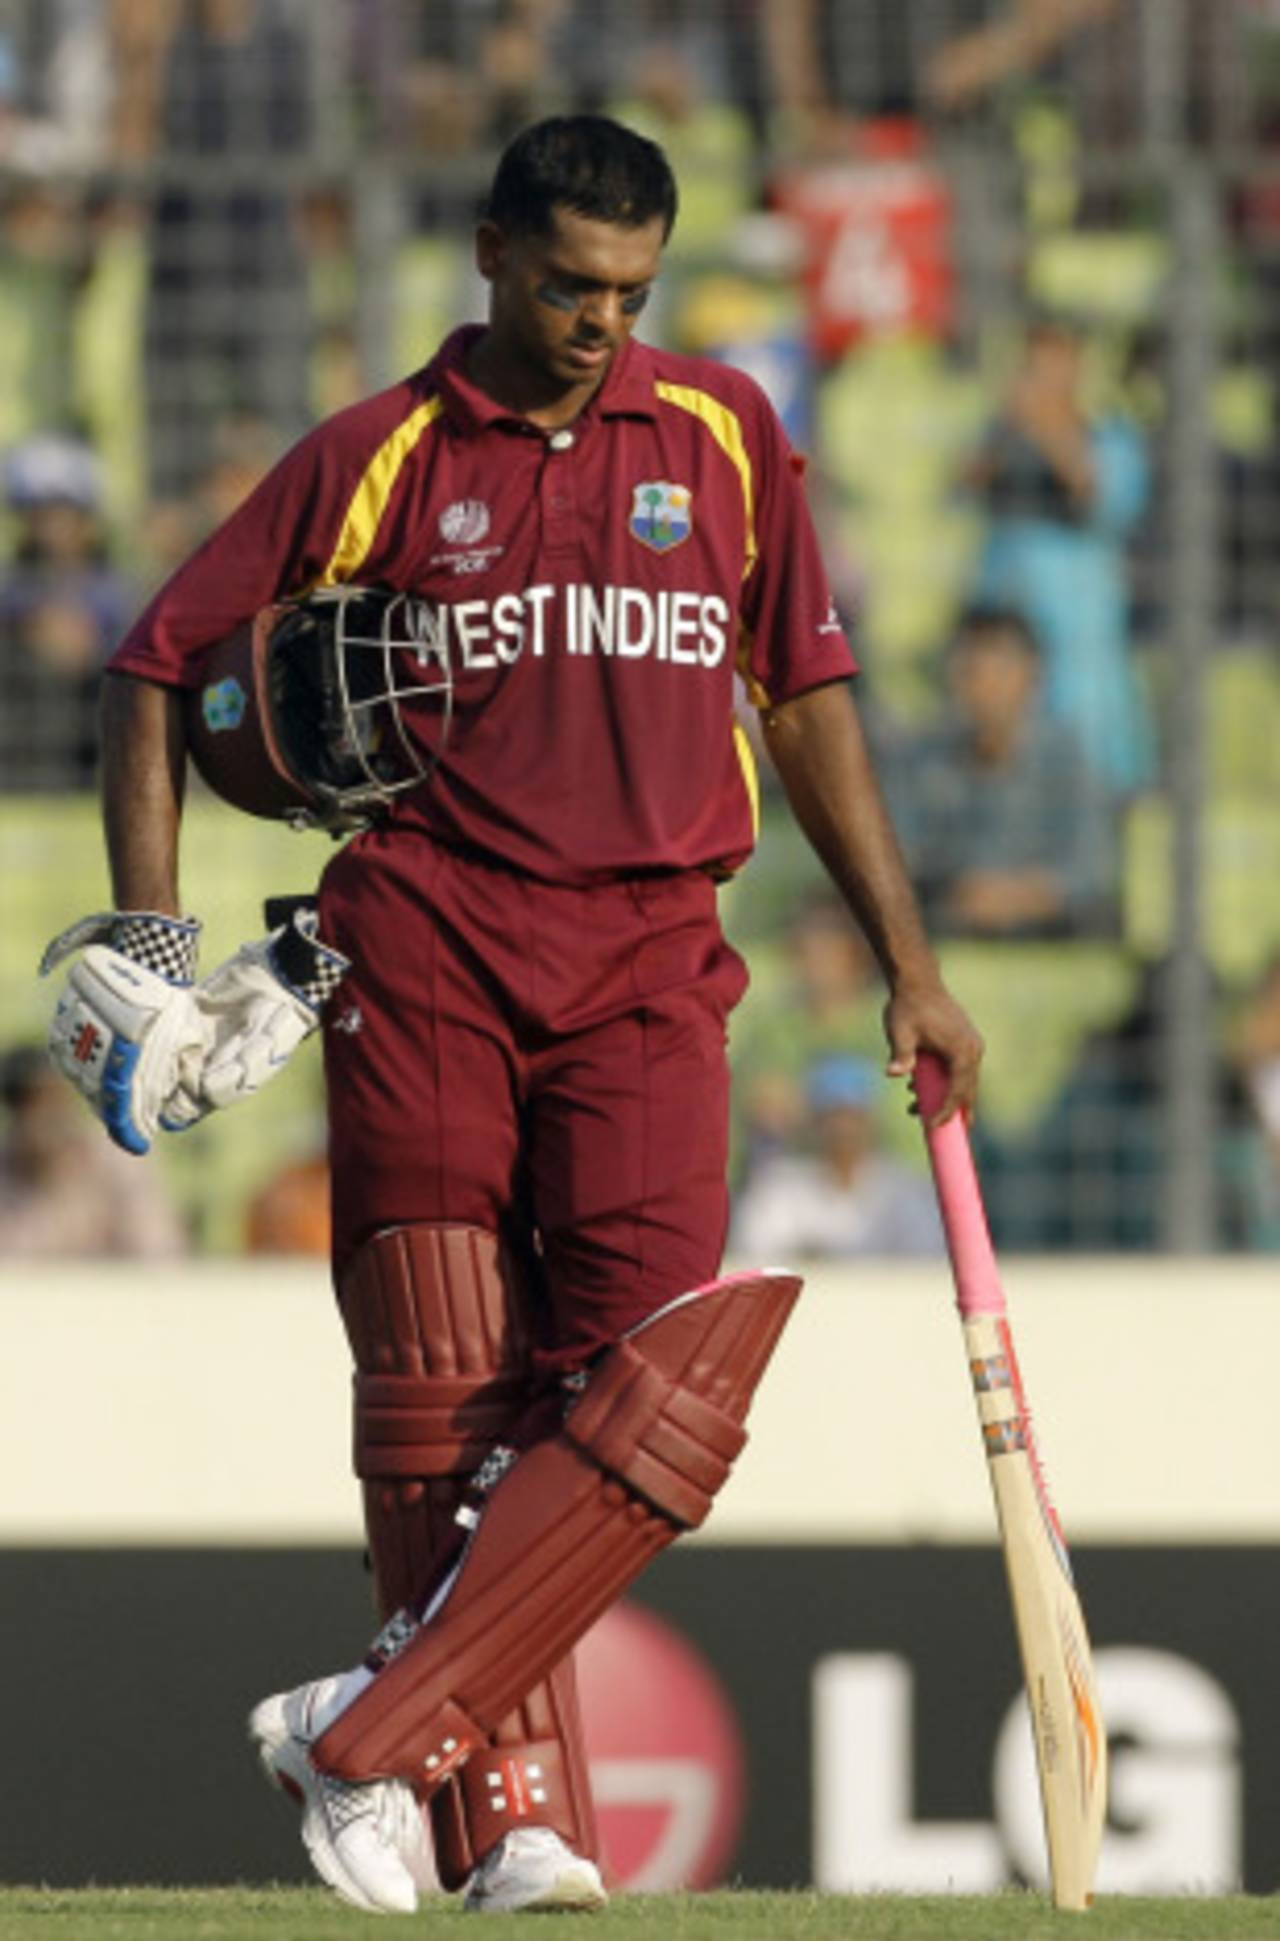 Shivnarine Chanderpaul has questioned Ernest Hilaire's comments about the lack of discipline and application in the West Indies team over the last 15 years&nbsp;&nbsp;&bull;&nbsp;&nbsp;Associated Press